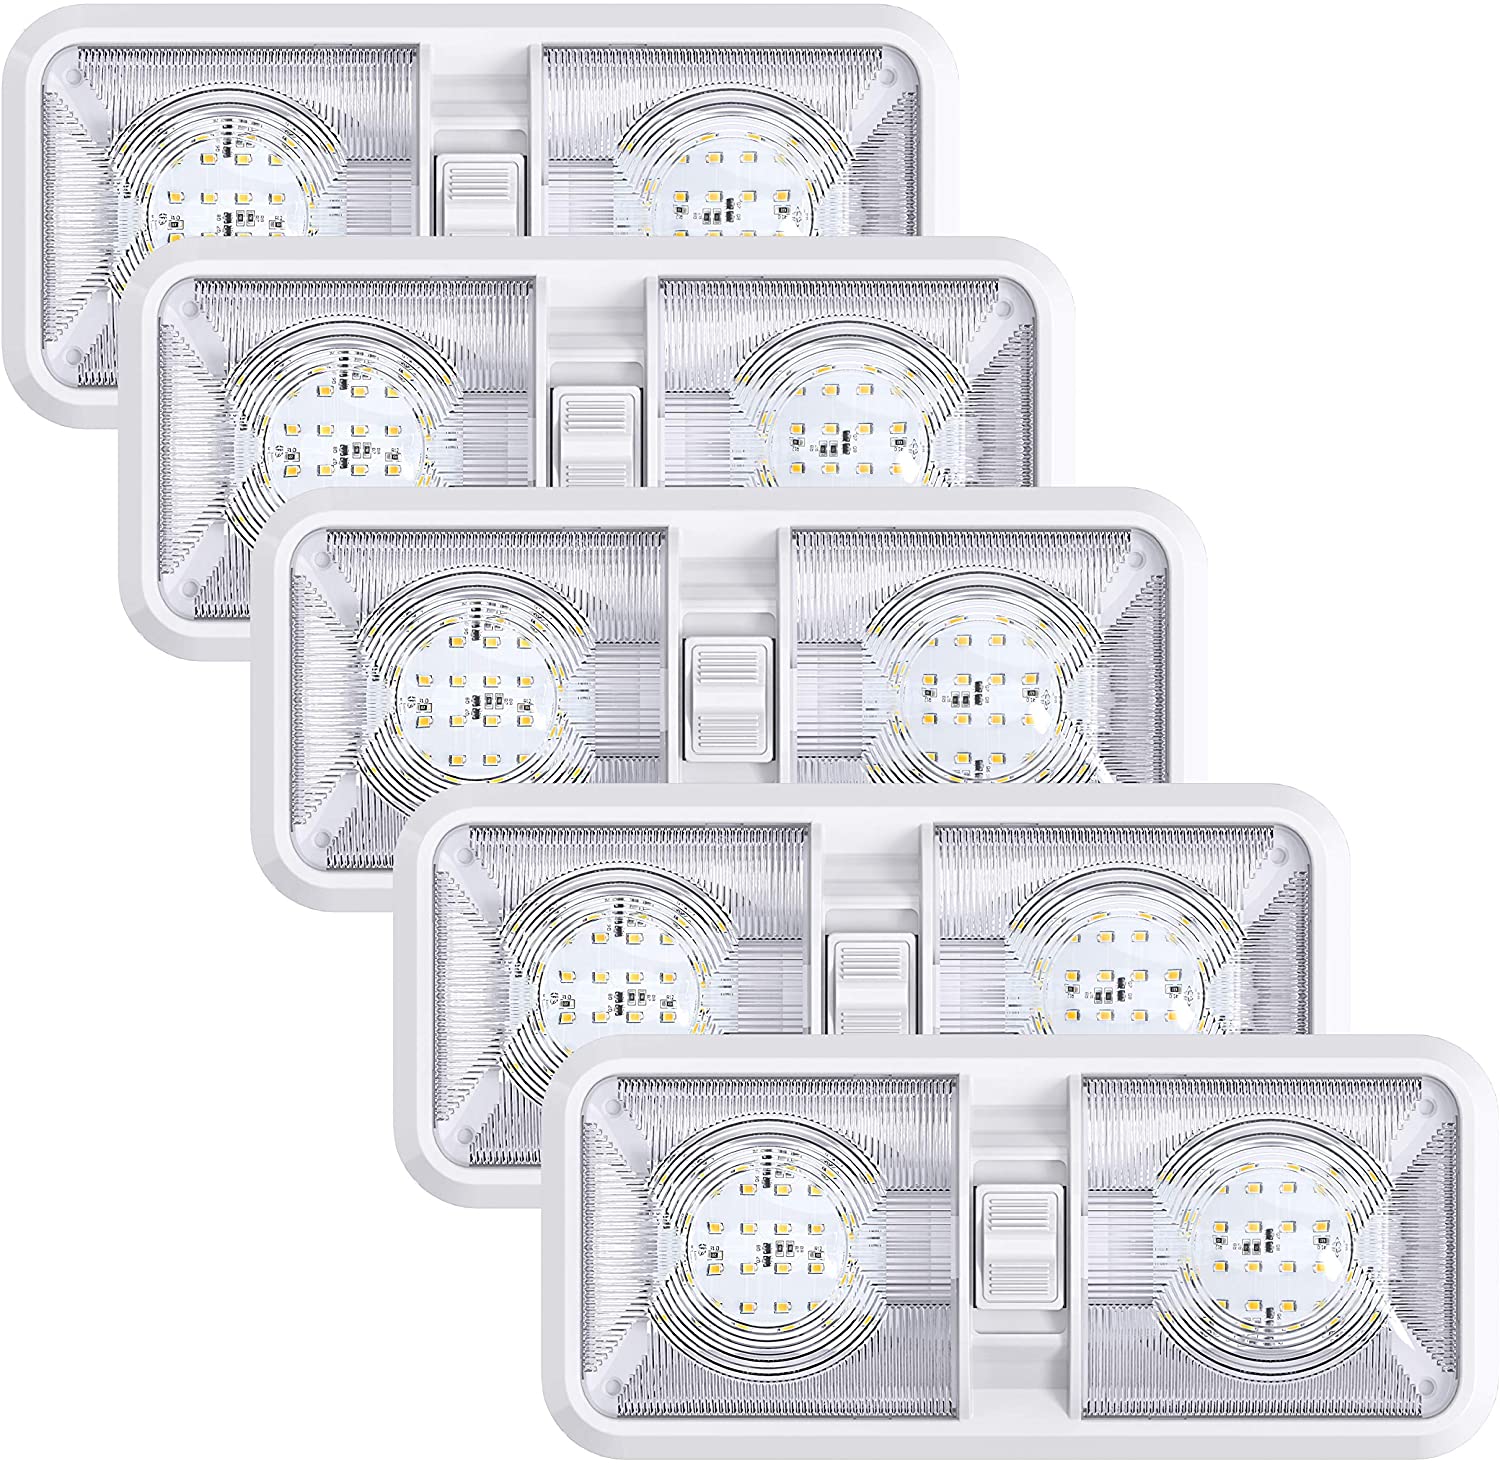 5 Pack Leisure LED RV LED Ceiling Double Dome Light Fixture with ON/OFF Switch Interior Lighting for Car/RV/Trailer/Camper/Boat DC 12V Natural White 4000-4500K 48X2835SMD (Natural White 4000-4500K, 5)